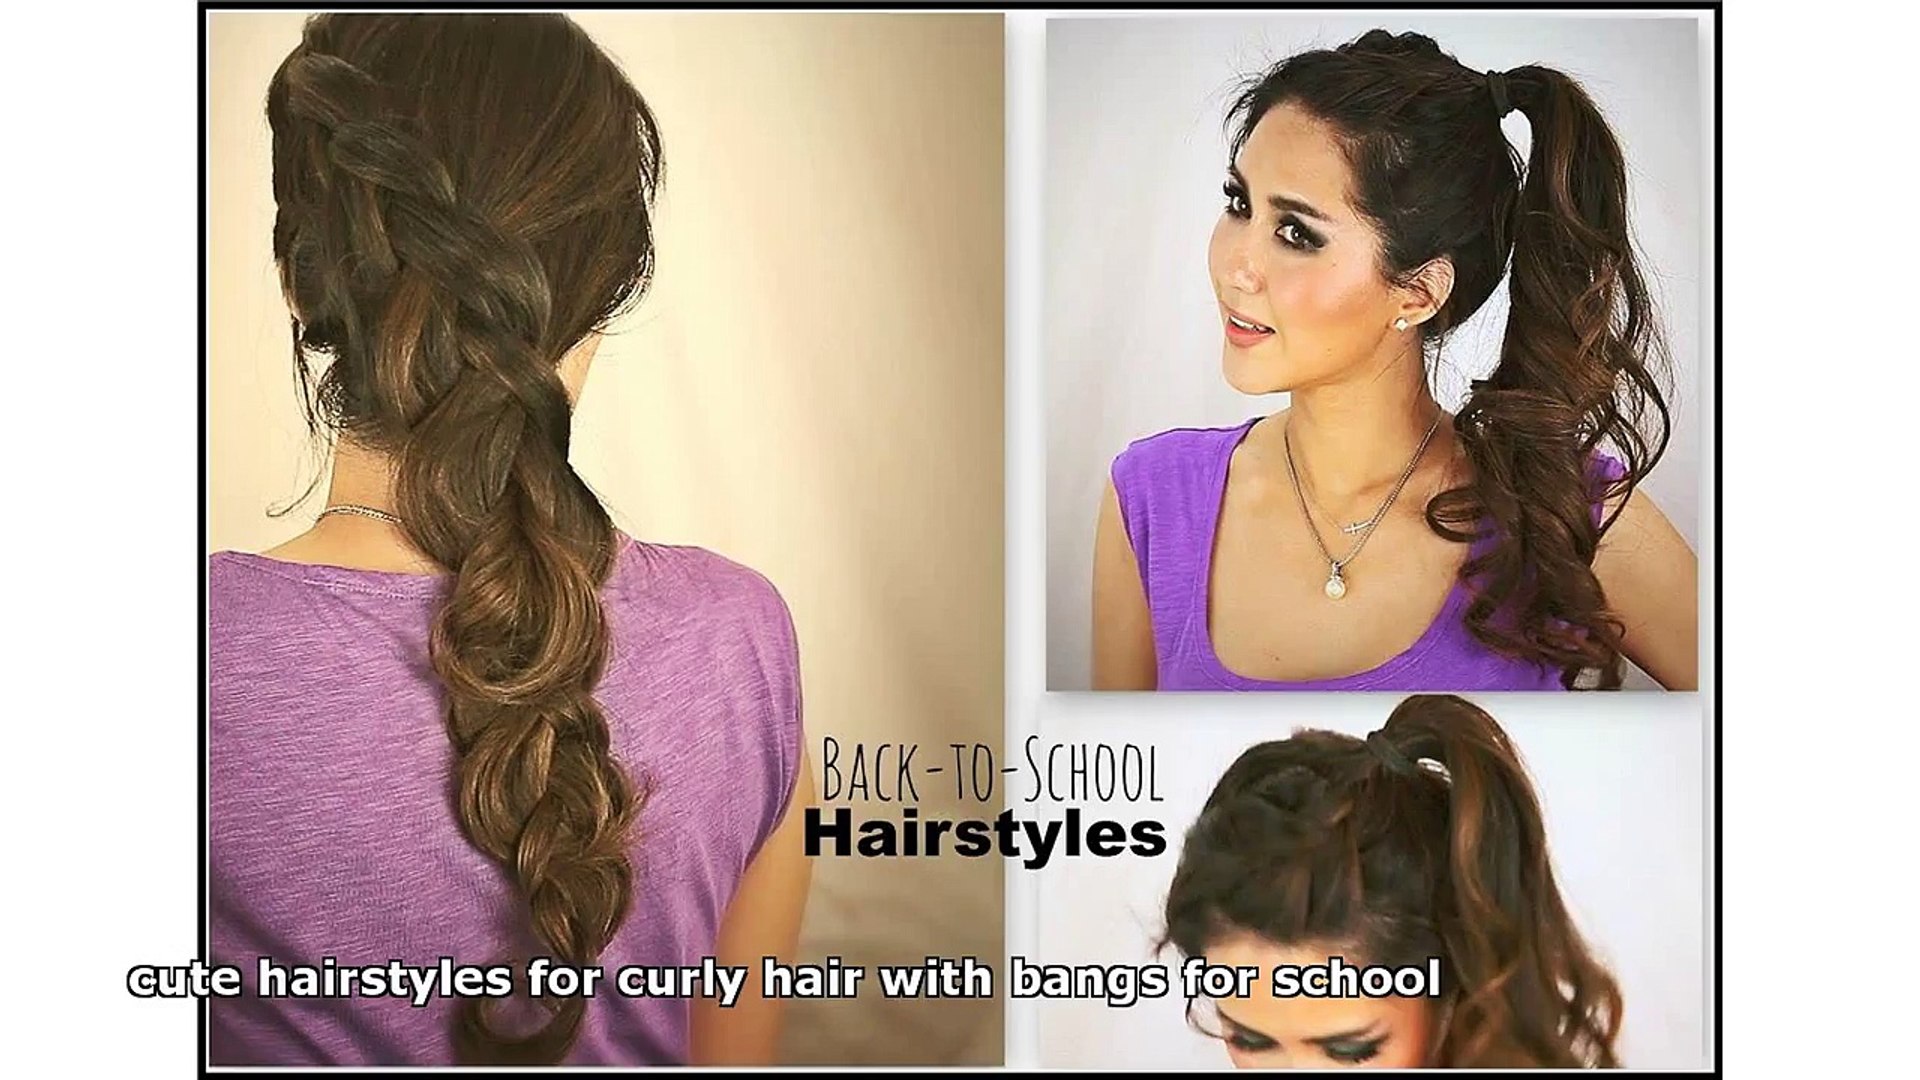 Cute Hairstyles For Curly Hair With Bangs For School